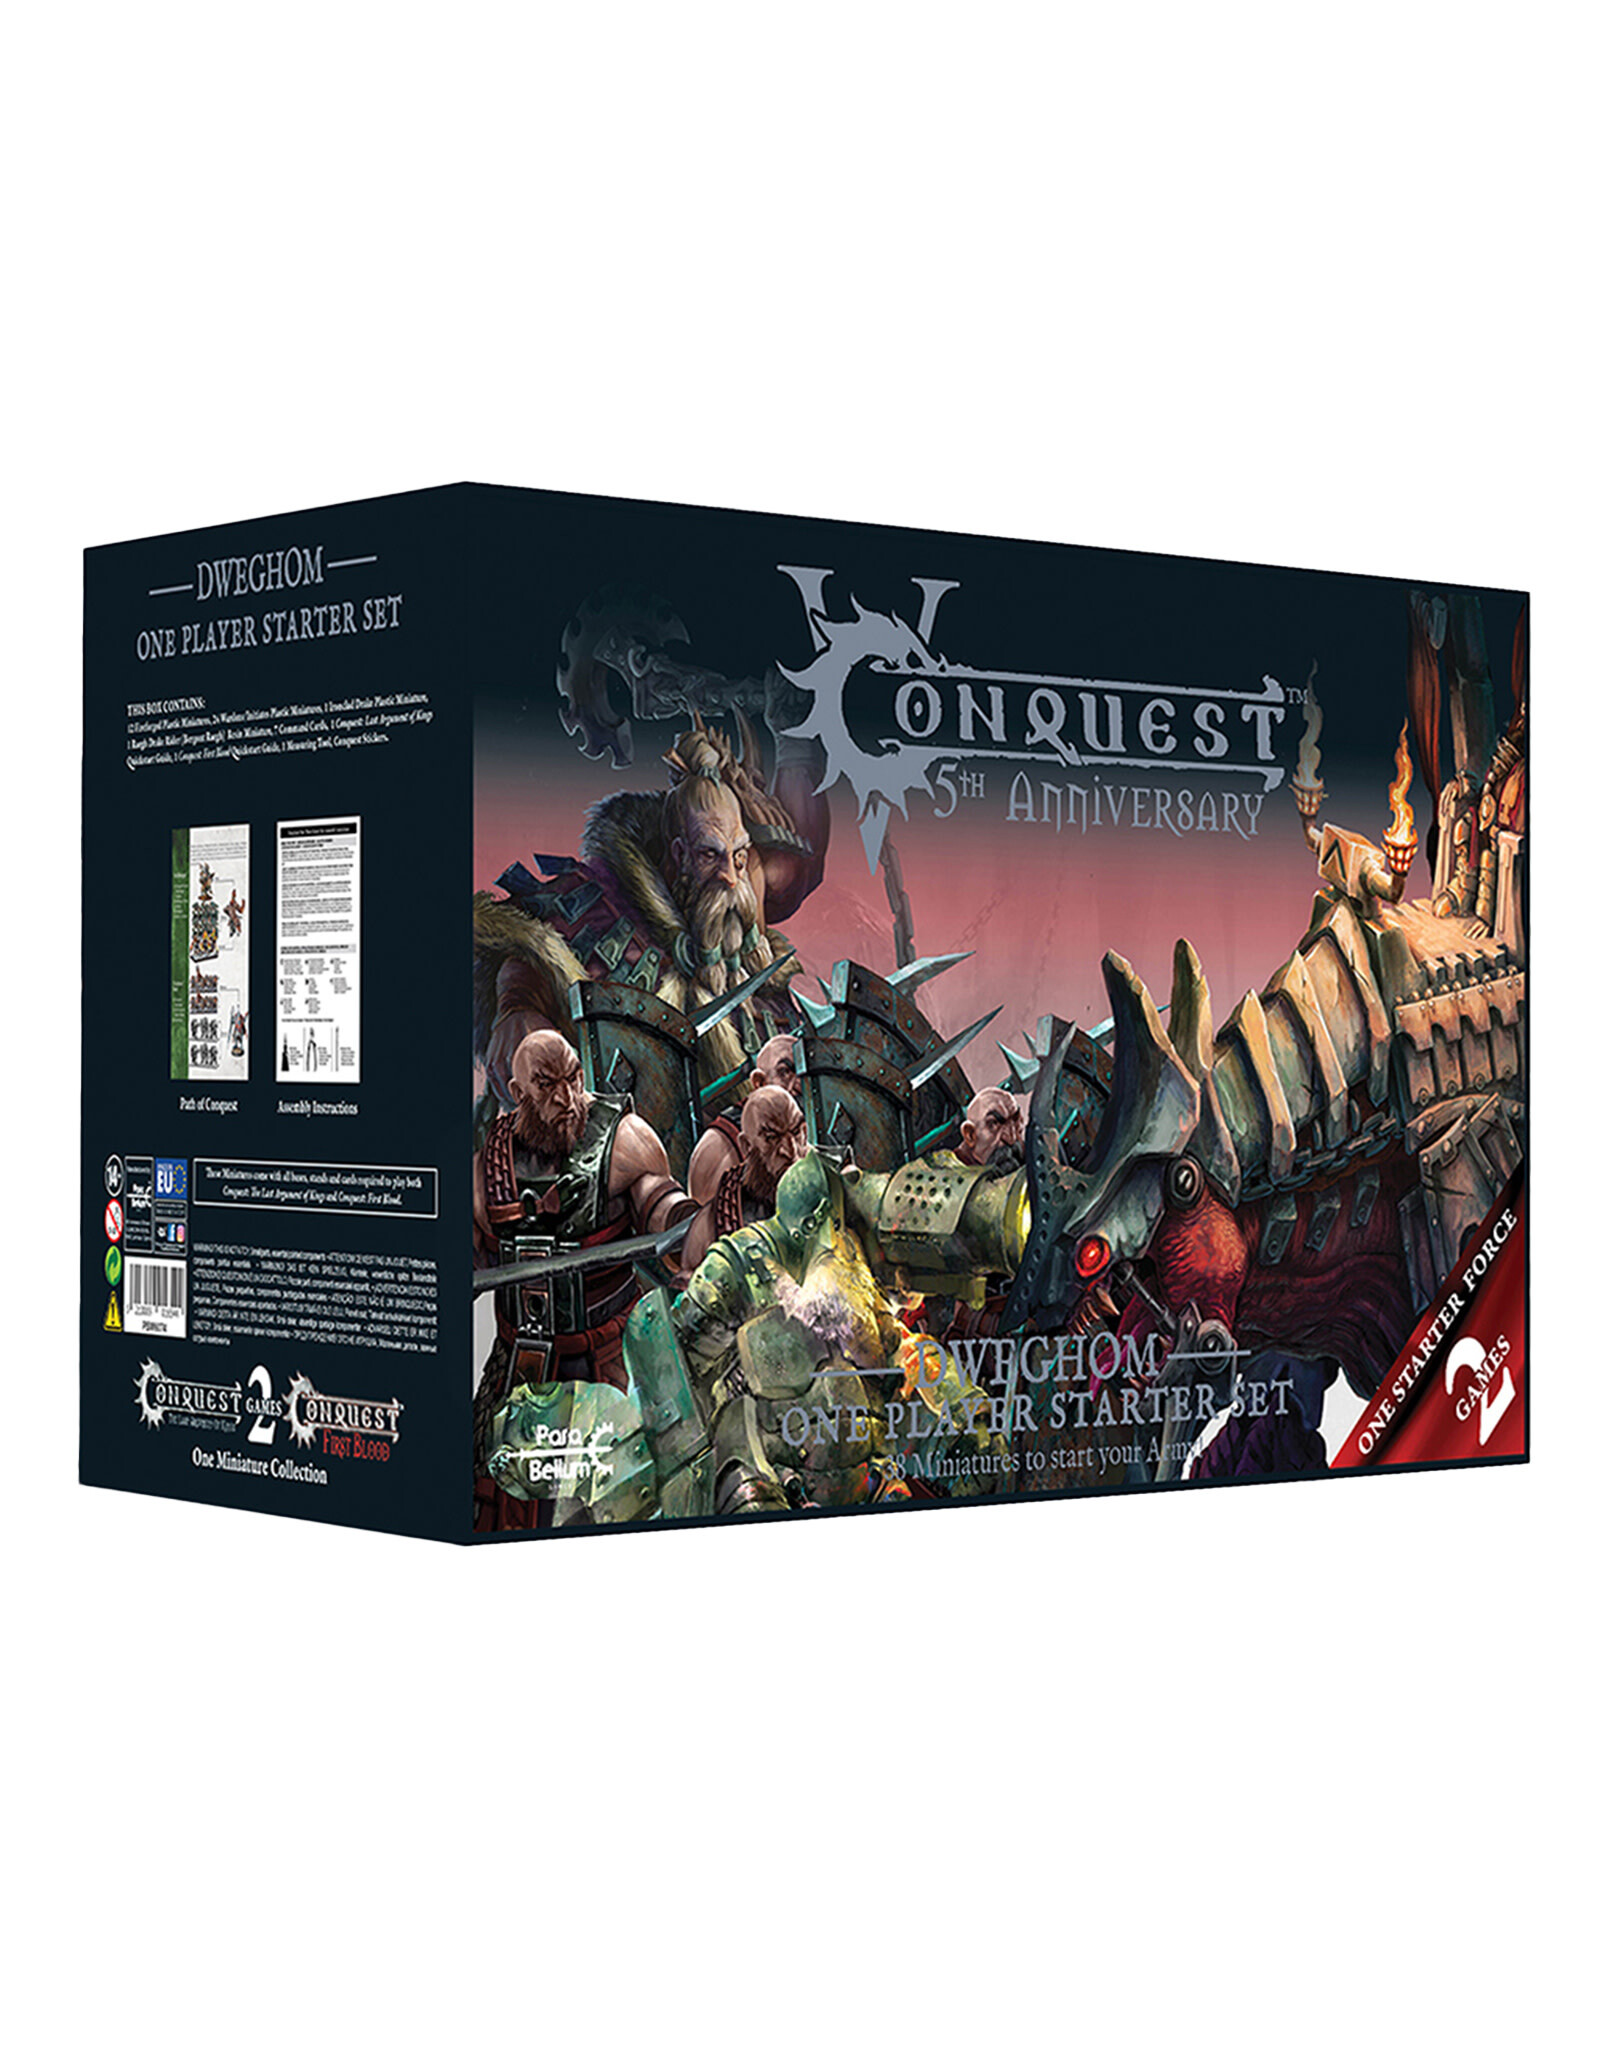 Conquest Conquest Dweghom 5th Anniversary Supercharged Starter Set